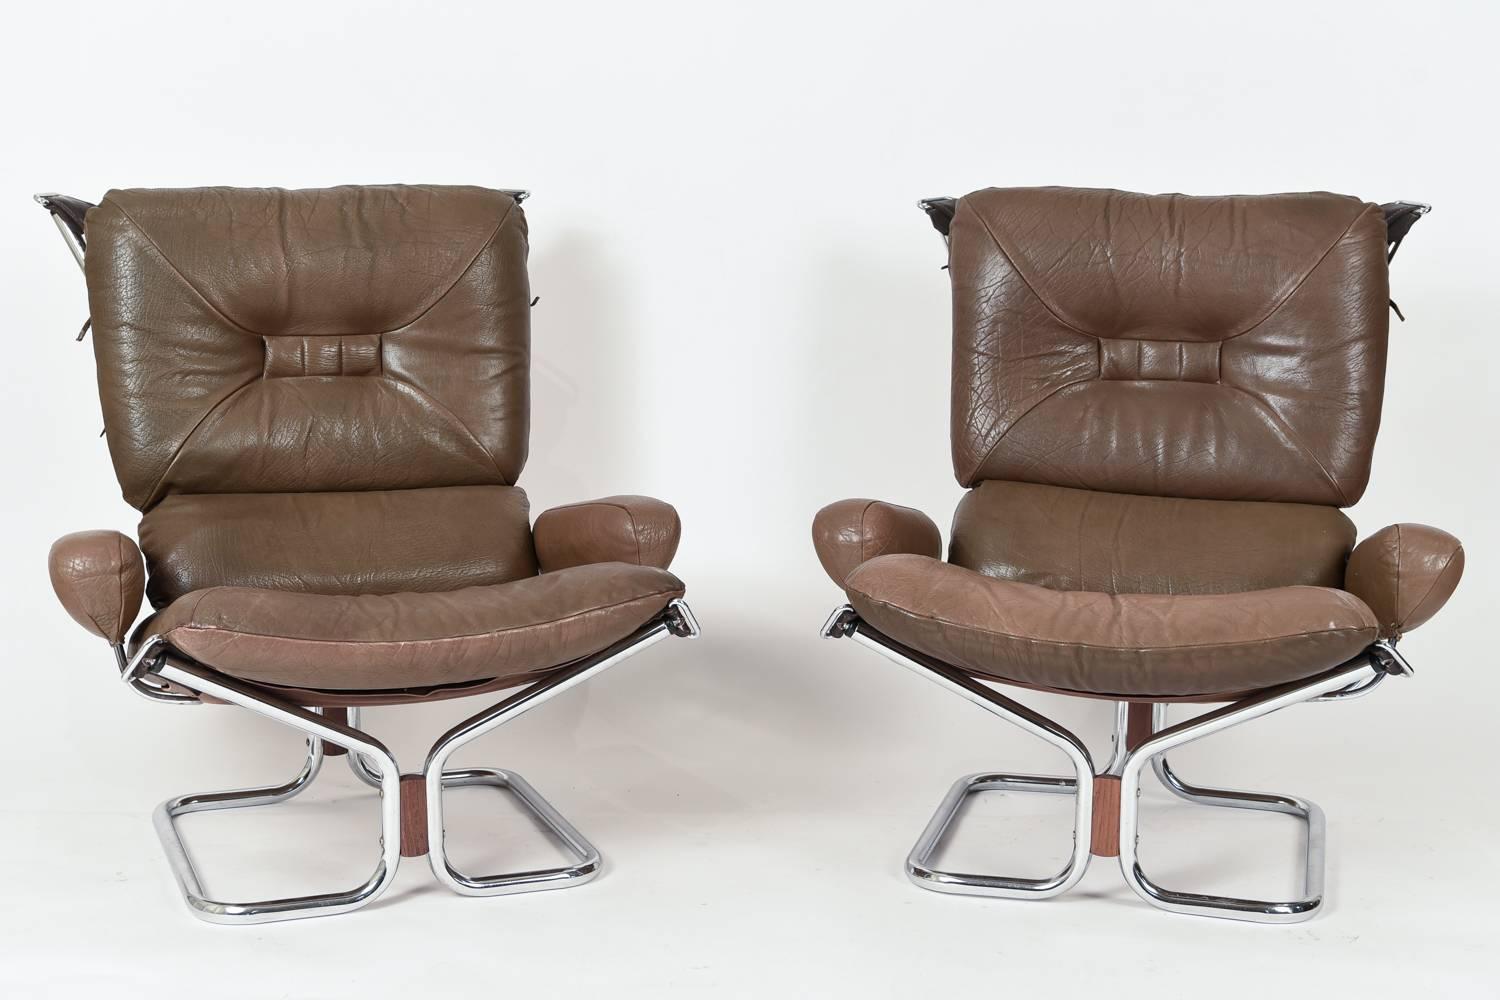 A beautiful and comfortable pair of sling chairs by Harald Relling. These iconic Danish chairs will be the focal point in any room.